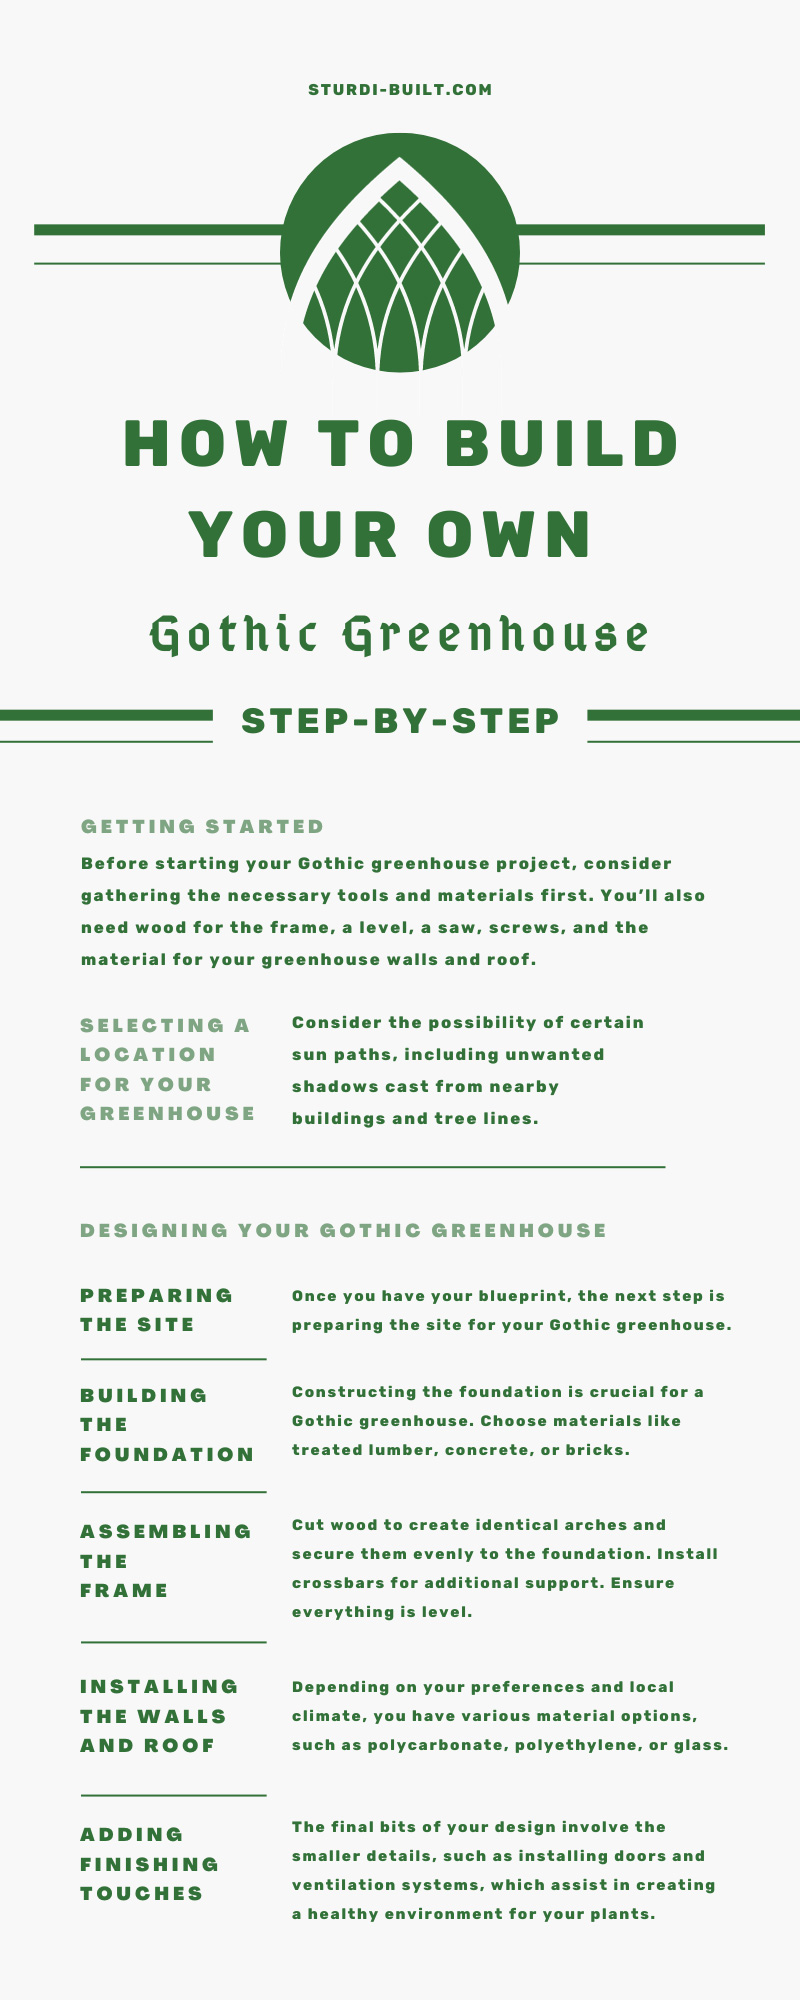 How To Build Your Own Gothic Greenhouse Step-by-Step